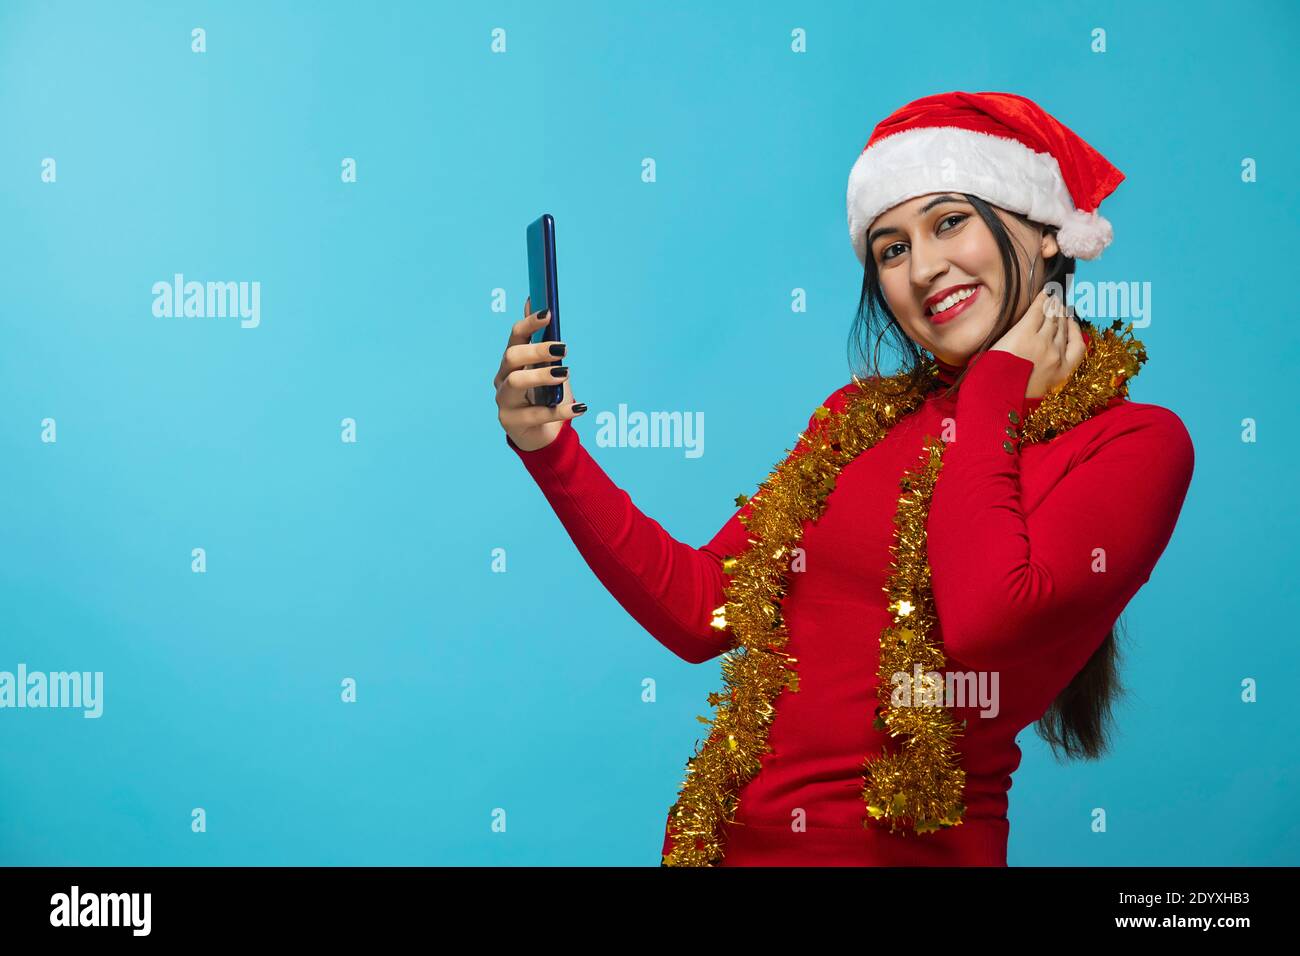 A portrait of a woman with Santa hat holding mobile phone Stock Photo